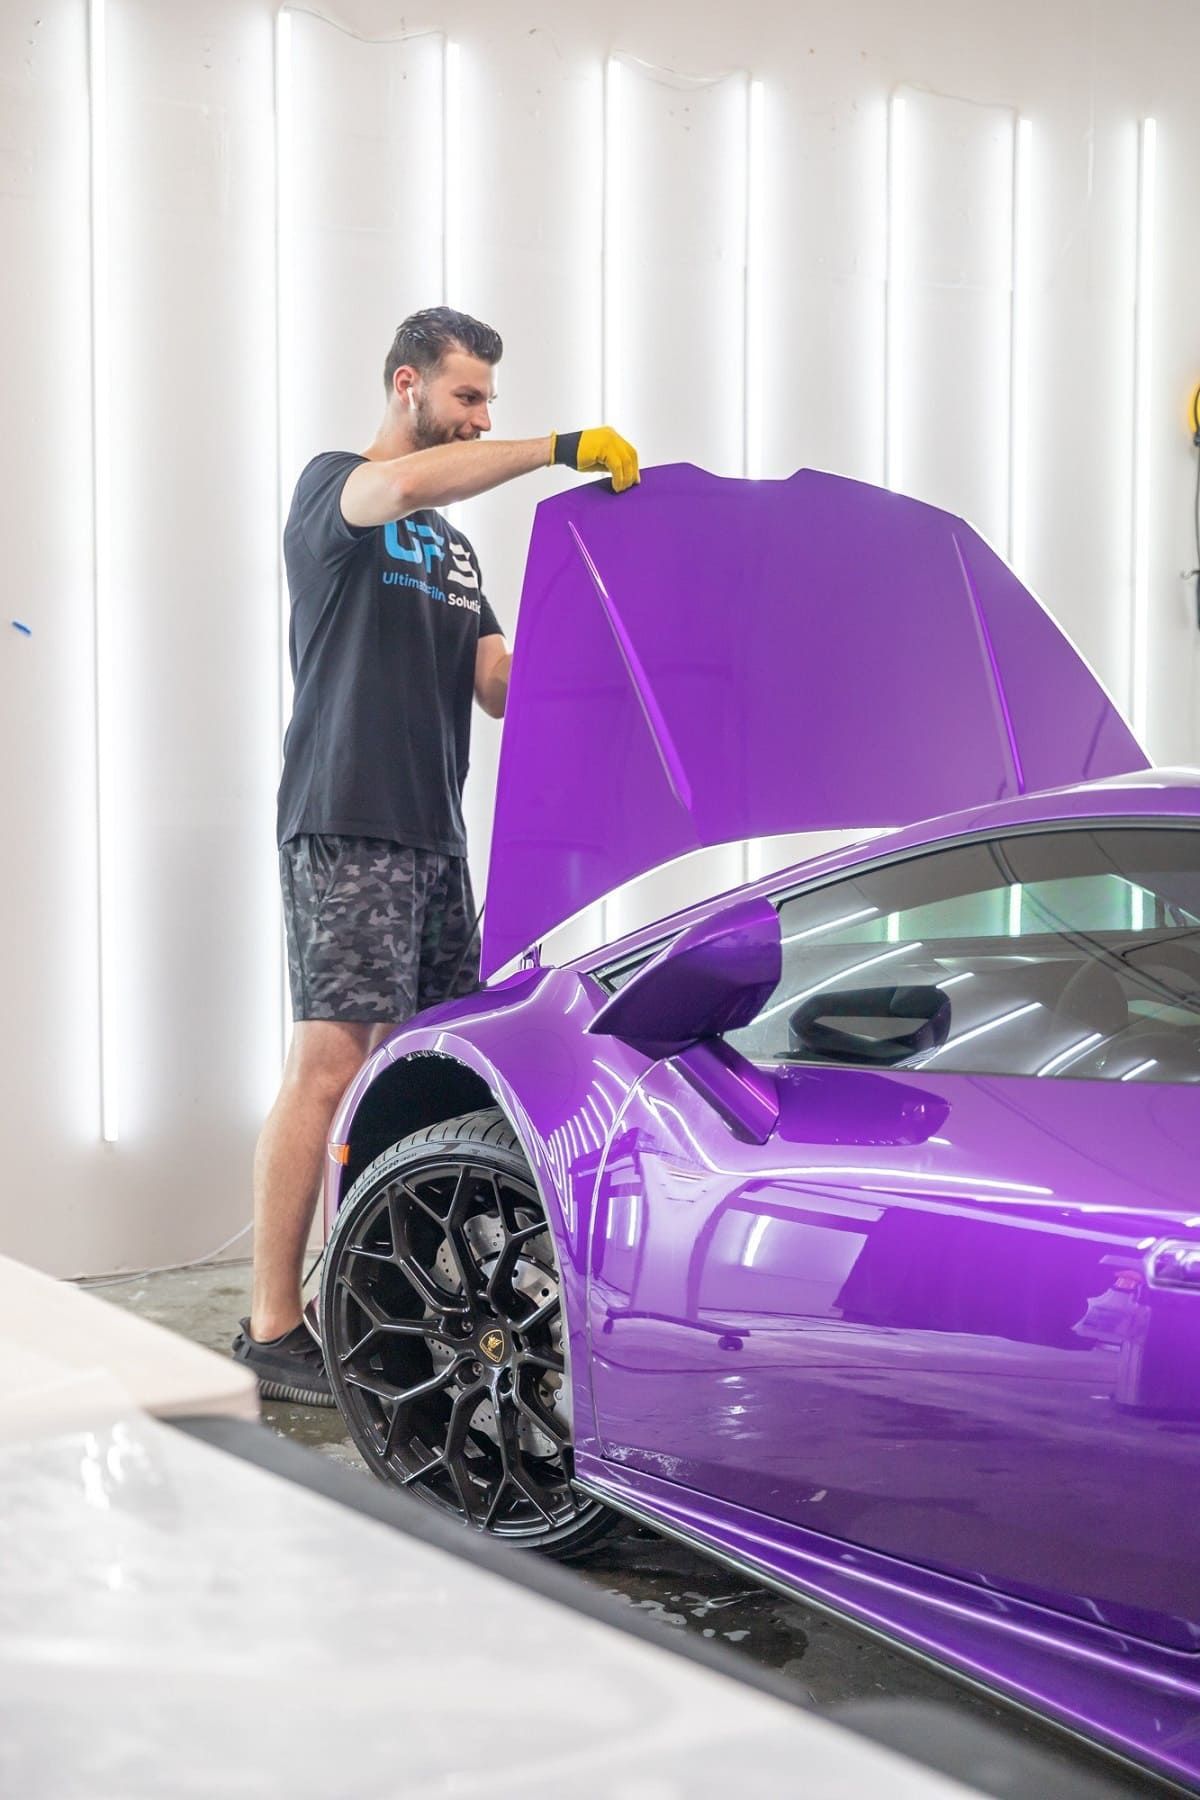 paint protection film near me